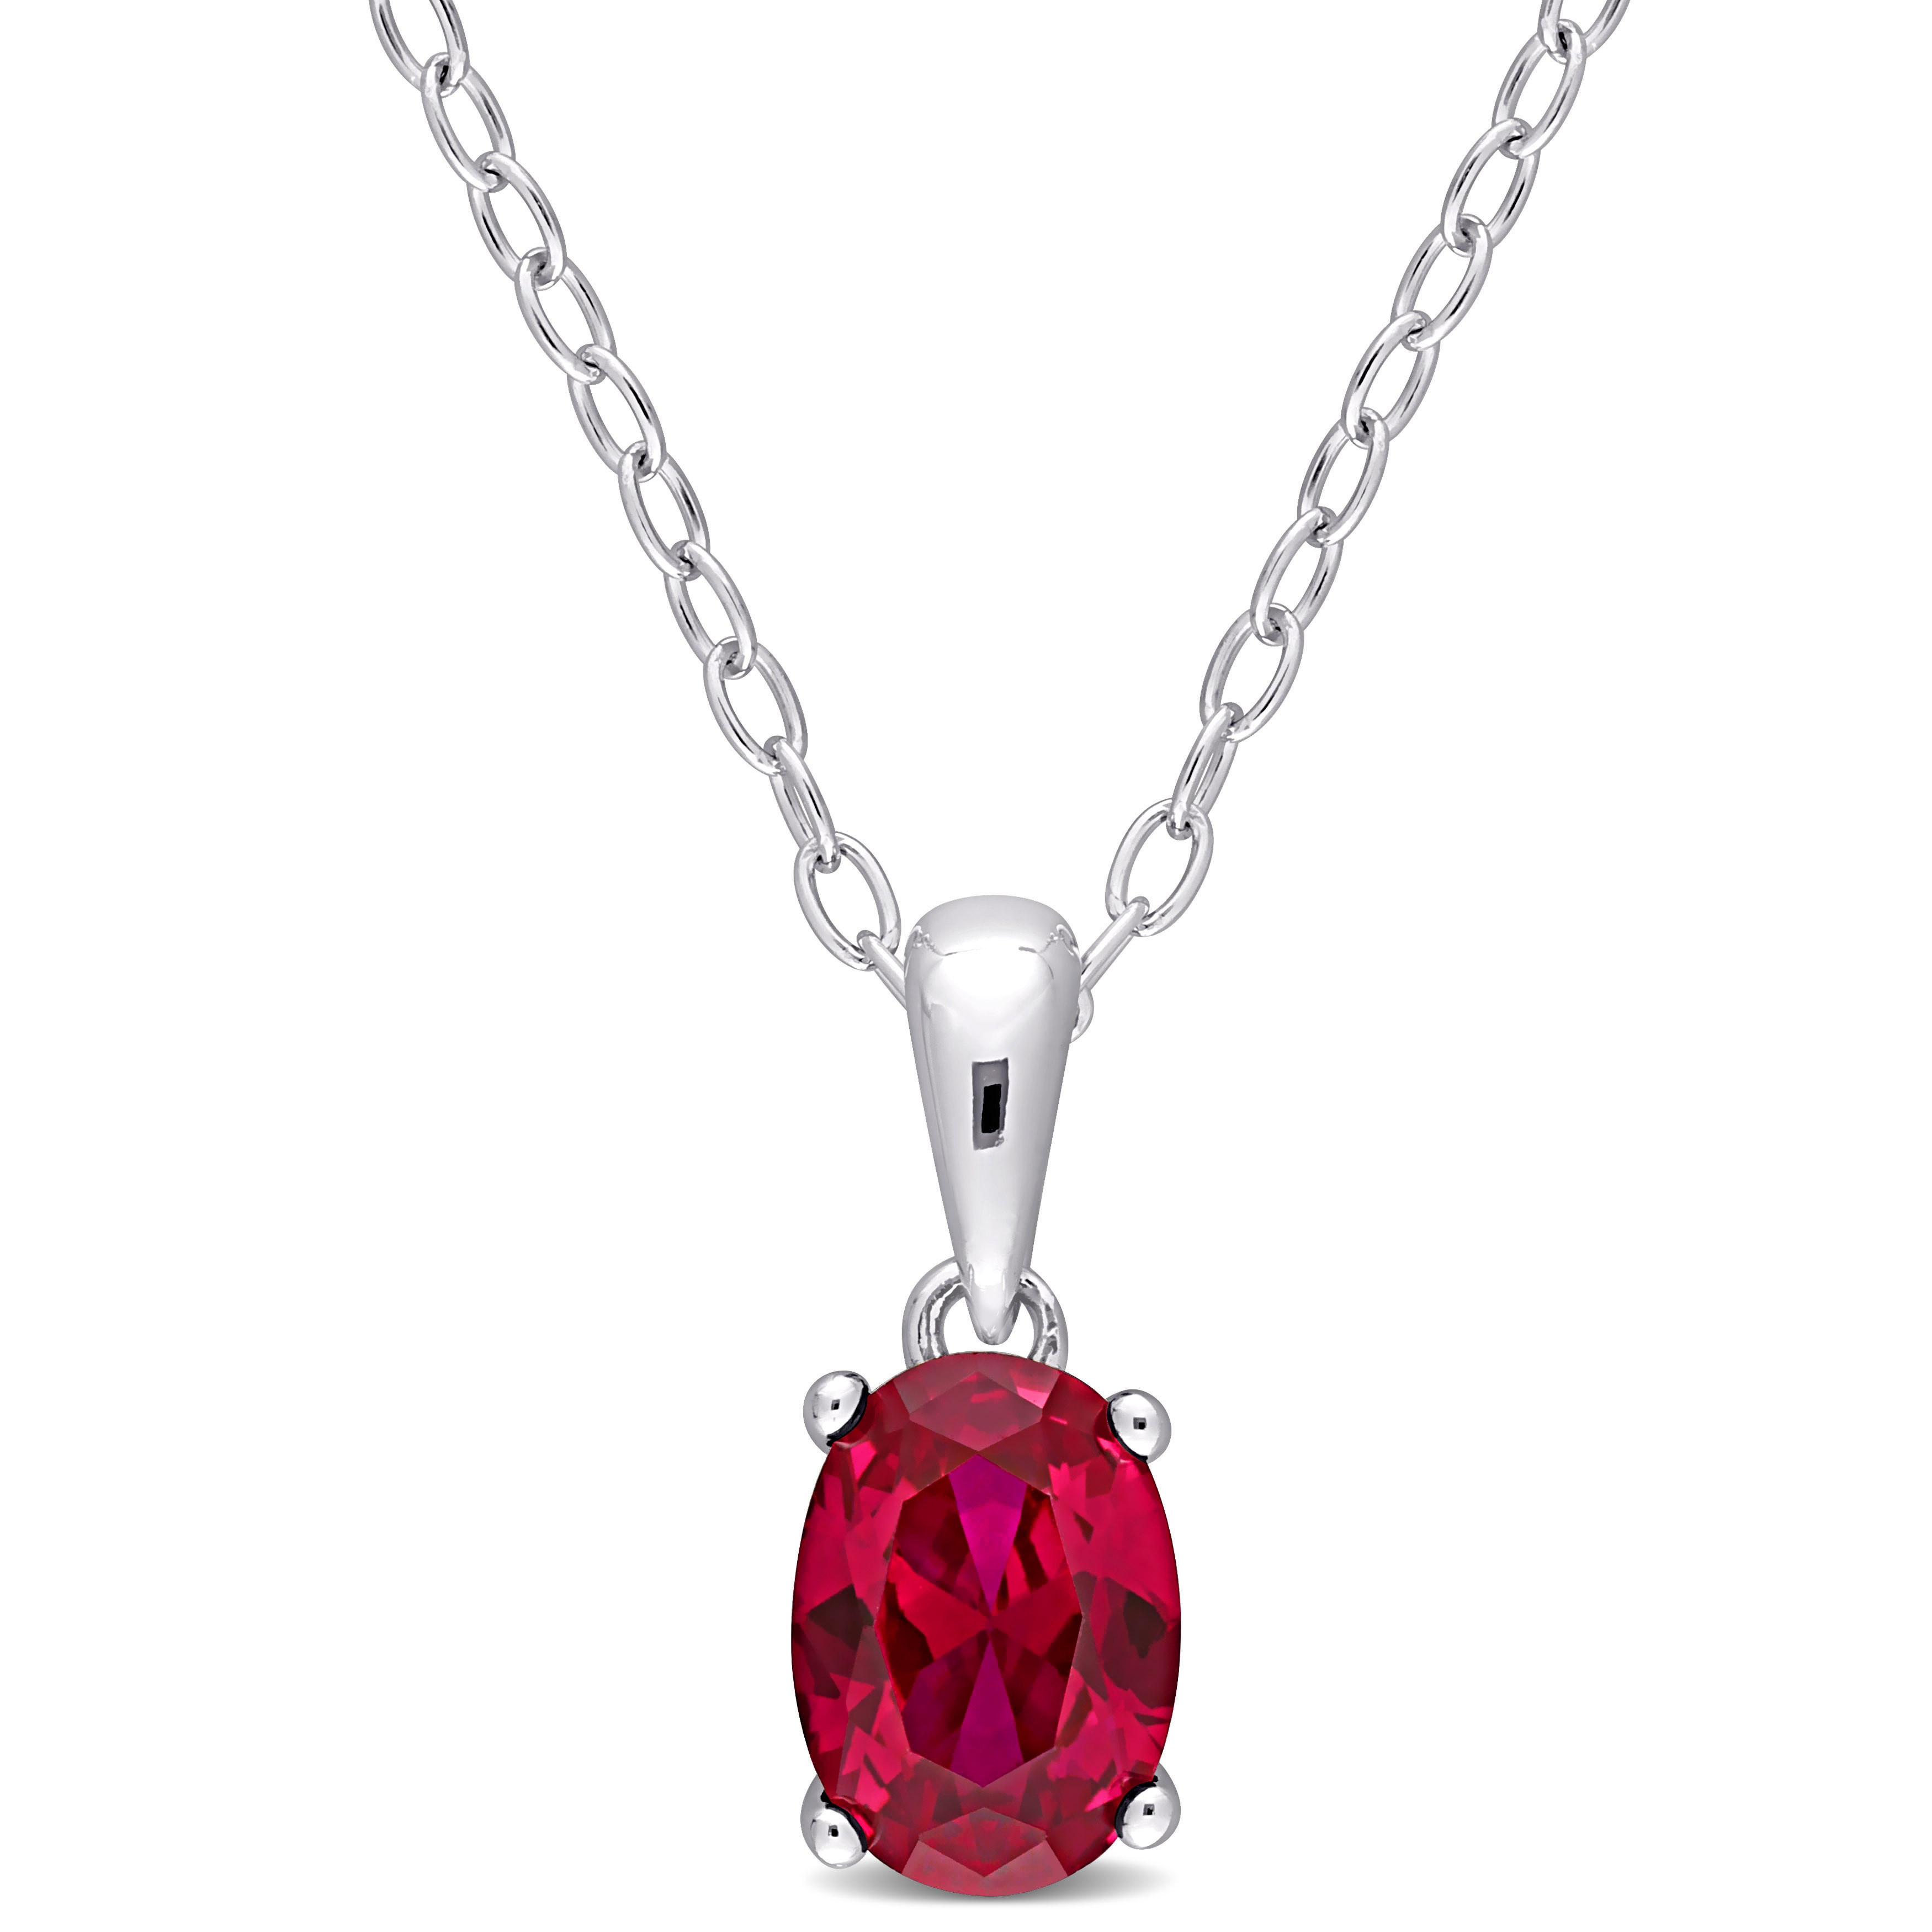 1 1/4 CT TGW Oval Created Ruby Solitaire Heart Design Pendant with Chain in Sterling Silver - 18 in.